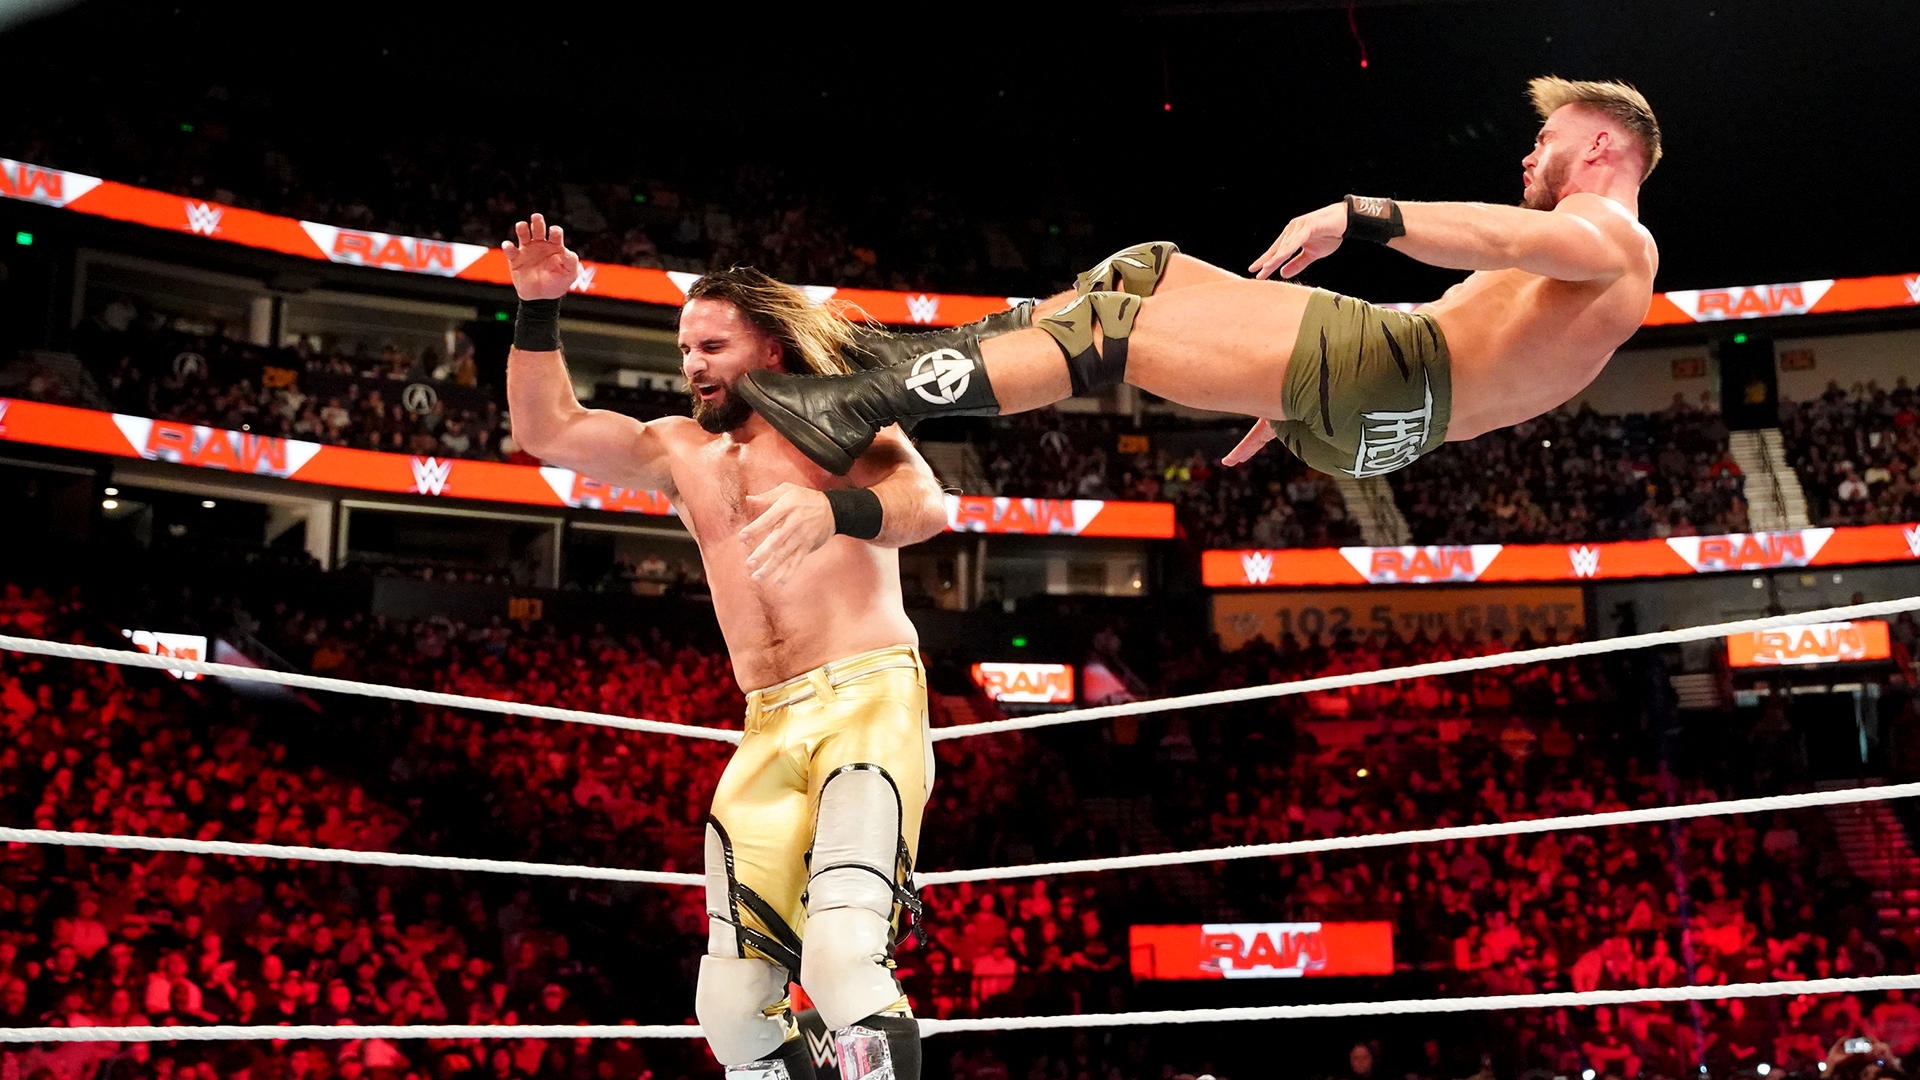 WWE Raw Results 2 23 (First Show Of Two Title Matches Scheduled) News, WWE Results, AEW News, AEW Results